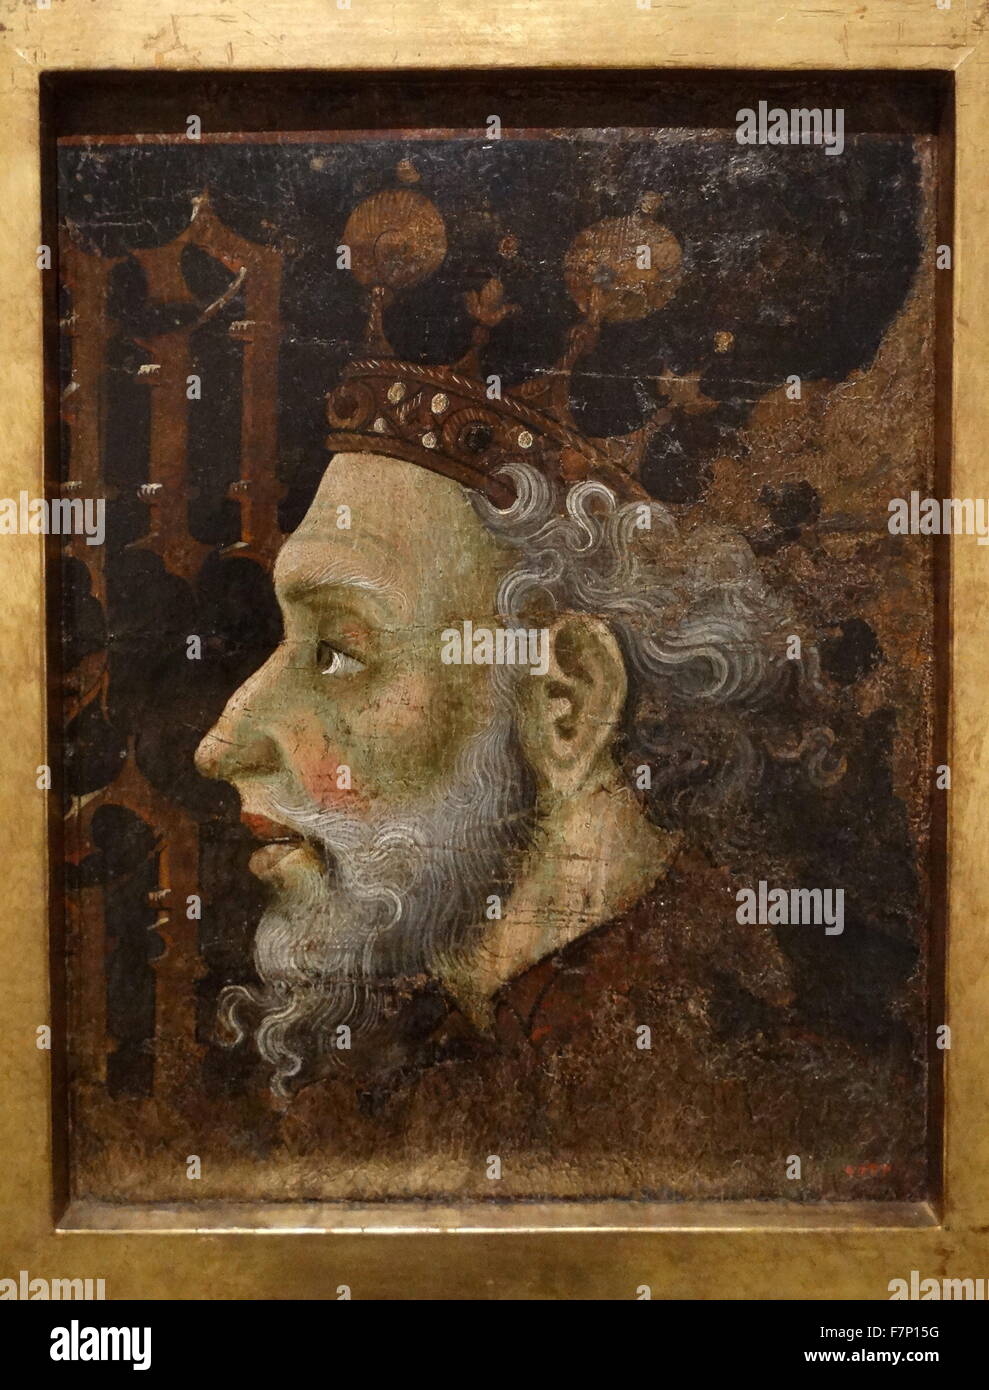 Portrait of Alfonso II Liberal, King of Aragon. By Gonzalo Pérez and Jaume Mateu, Catalonian artists of the 15th Century Stock Photo